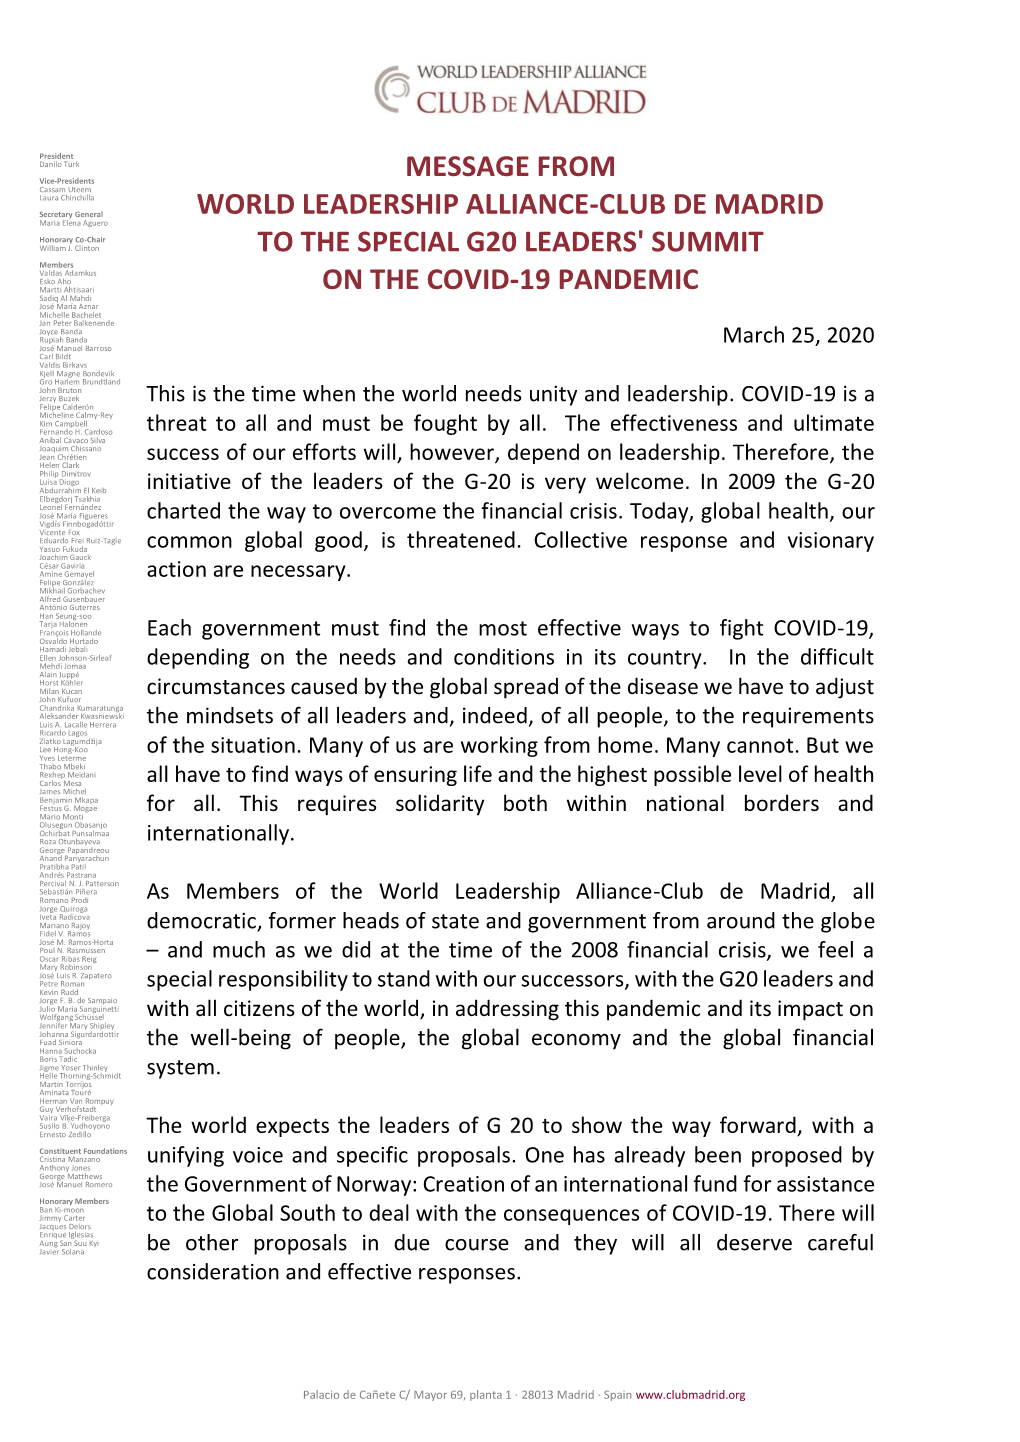 Message to the Special G20 Leaders